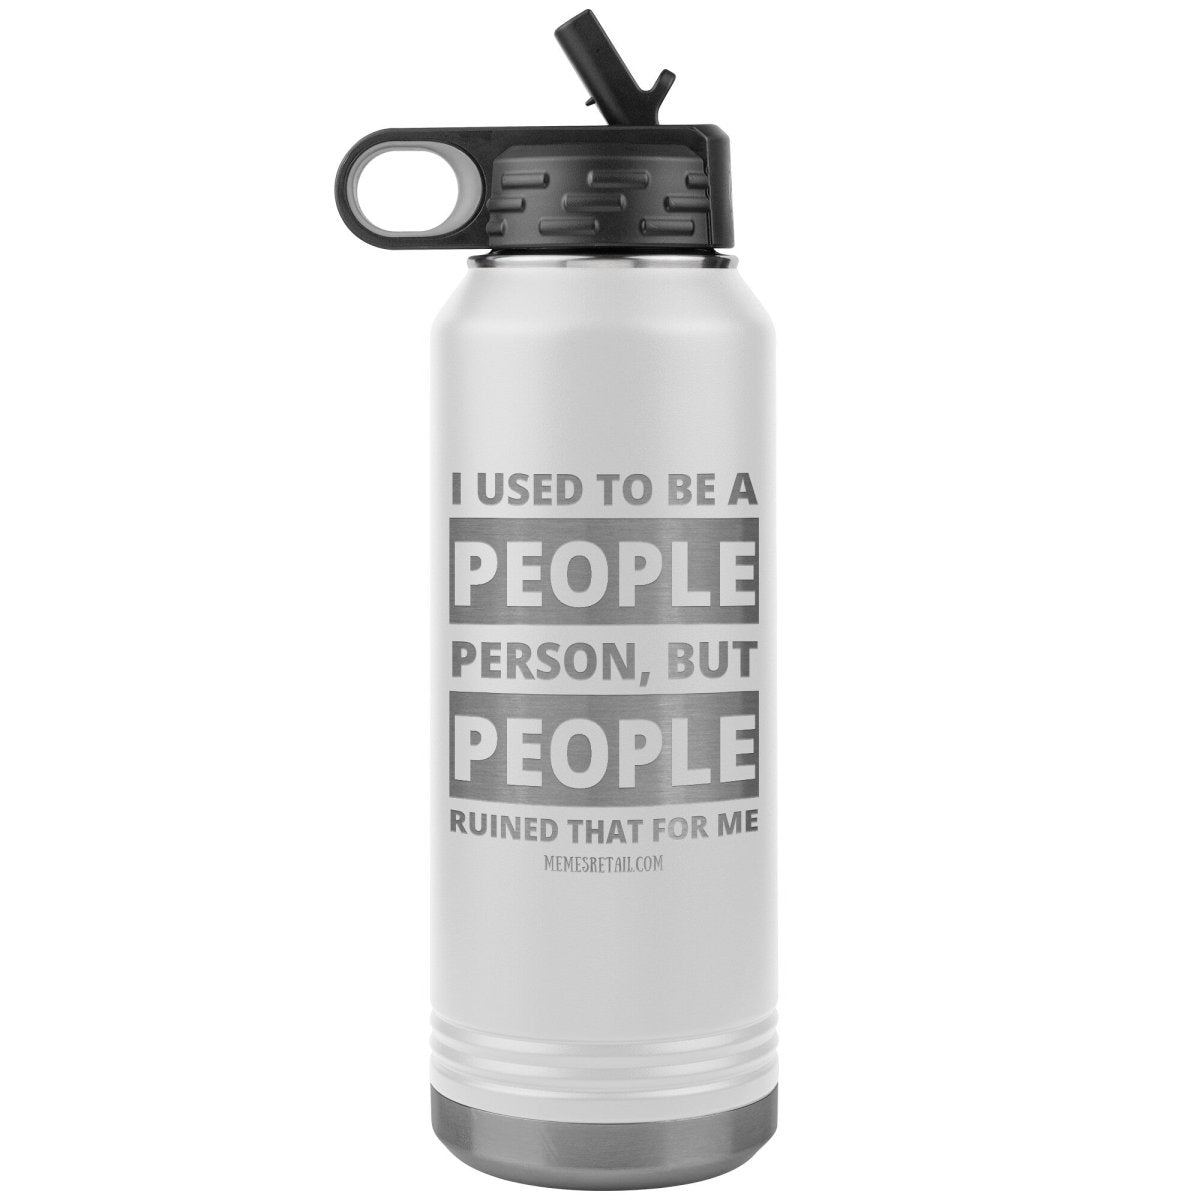 I Used To Be A People Person, But People Ruined That For Me 32 oz Water Tumbler, White - MemesRetail.com